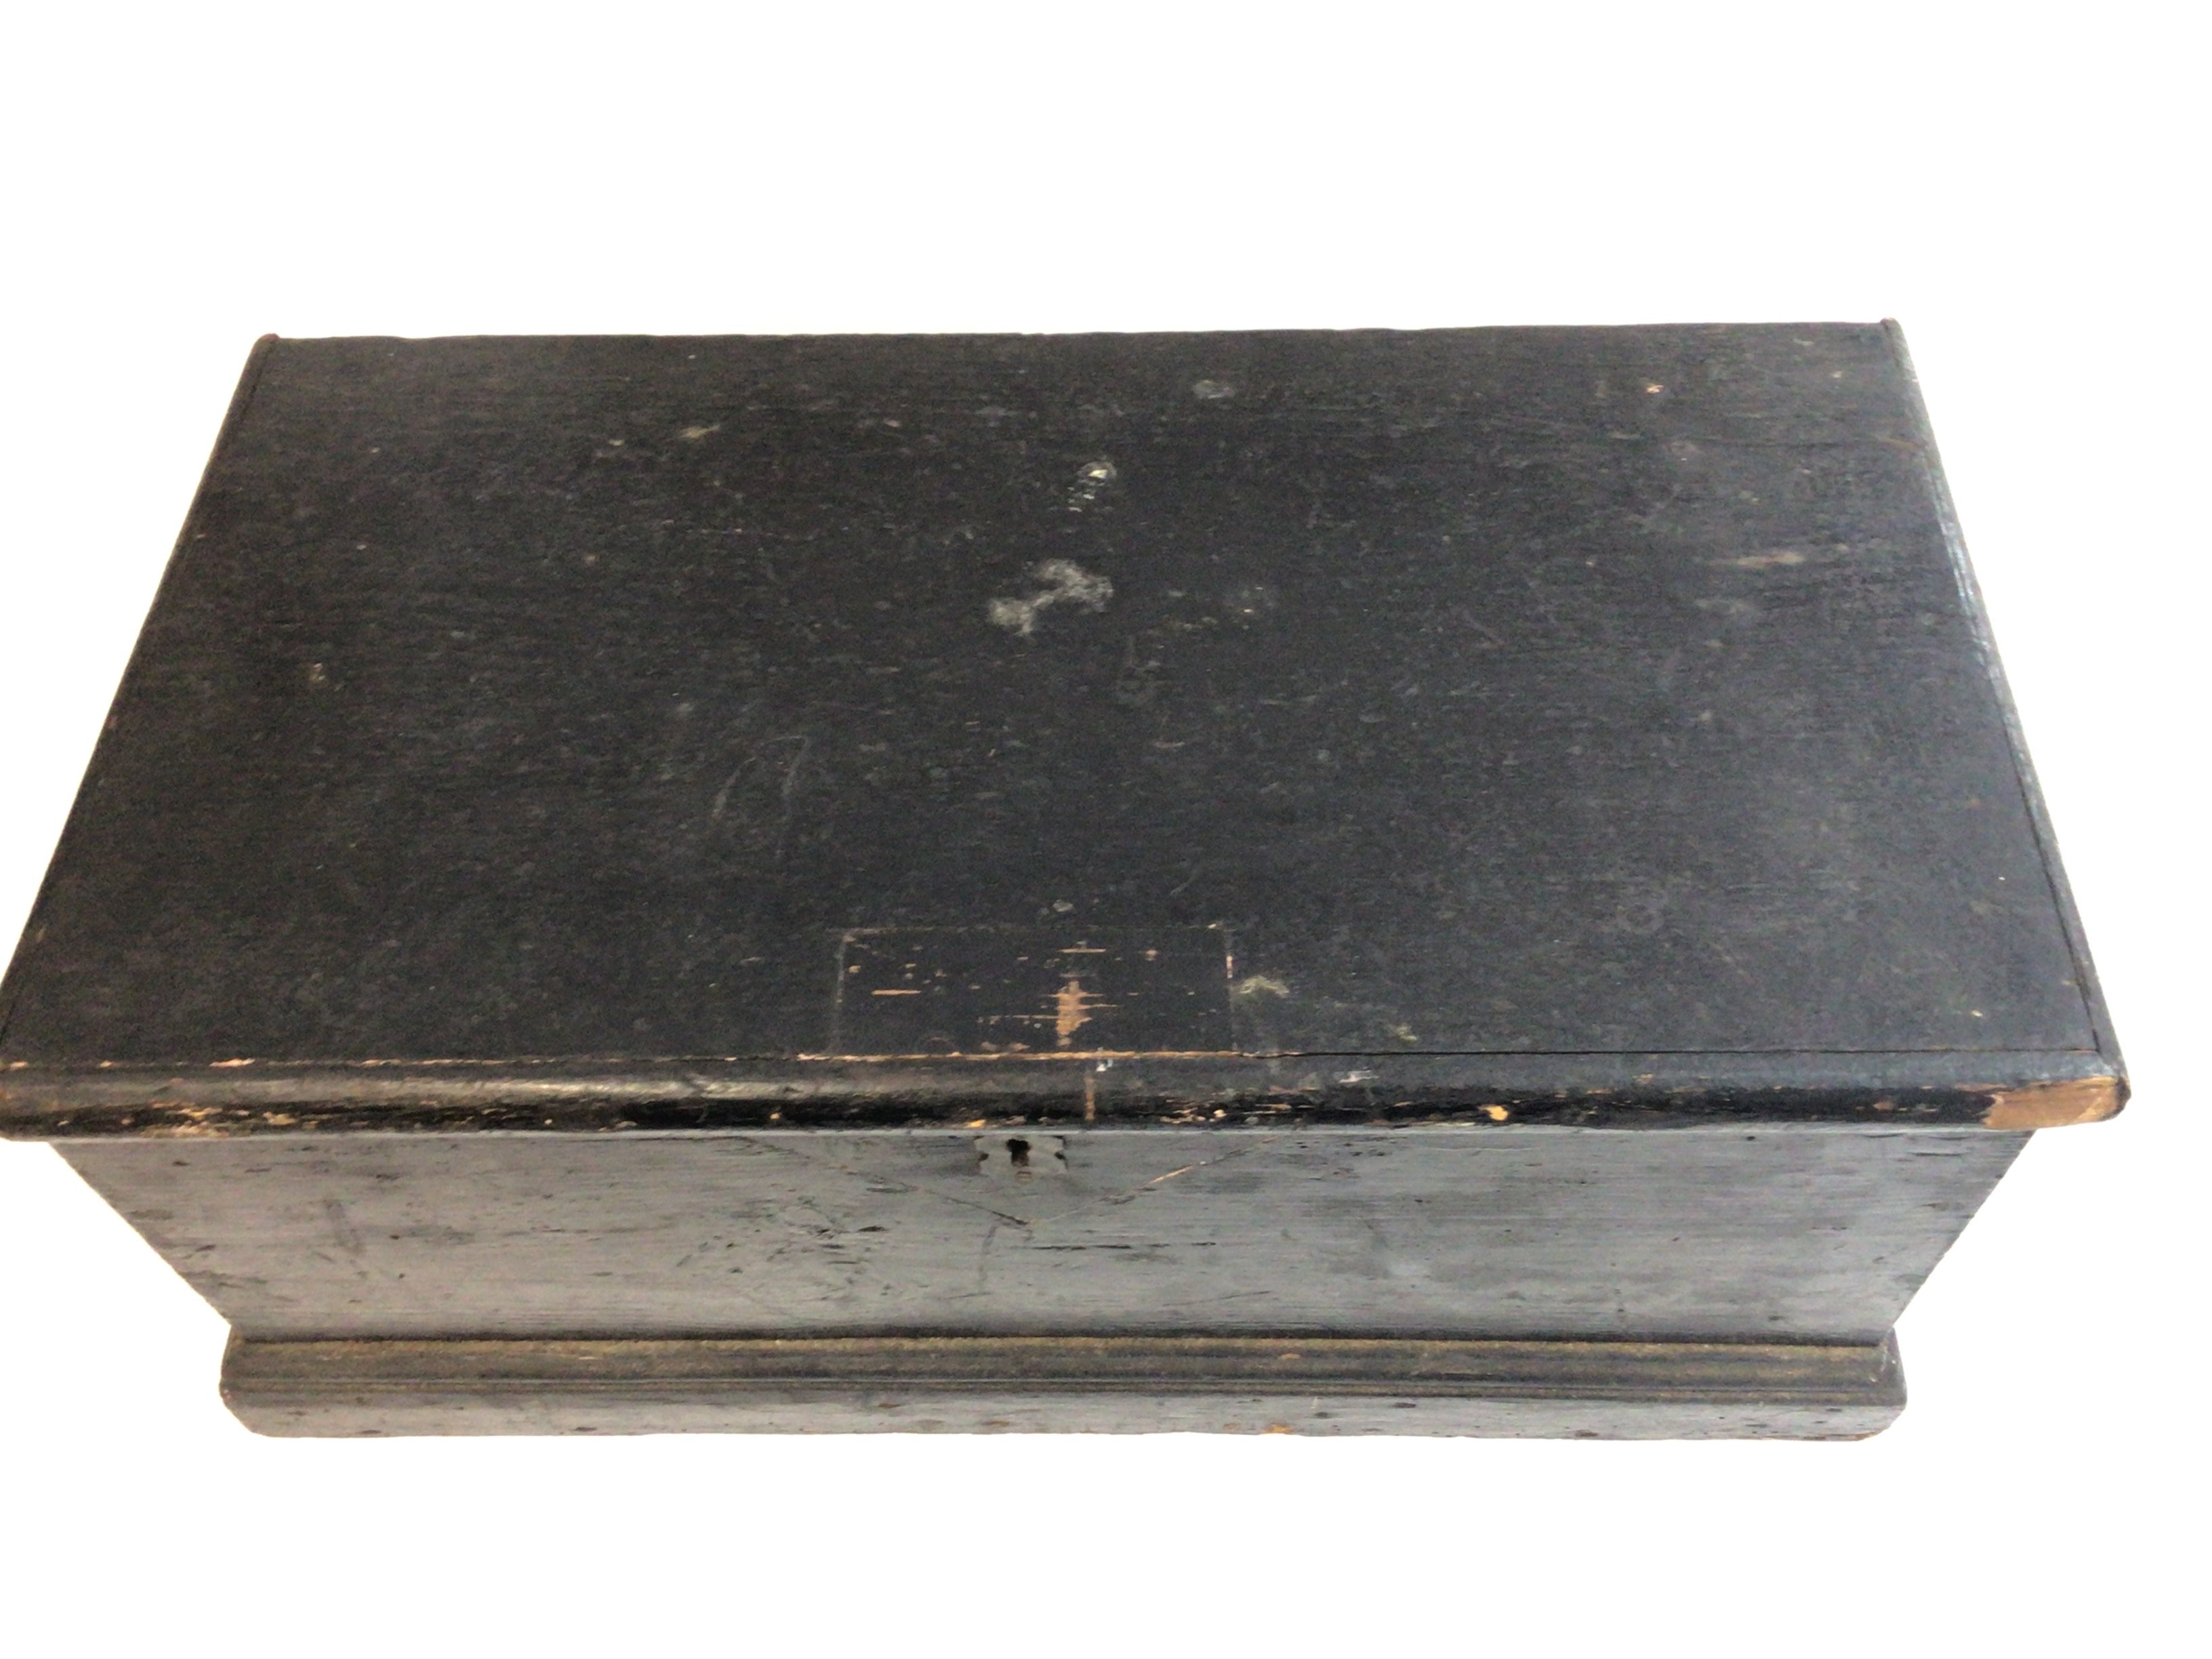 A wooden box 53cm wide by 28cm deep and 23cm tall.